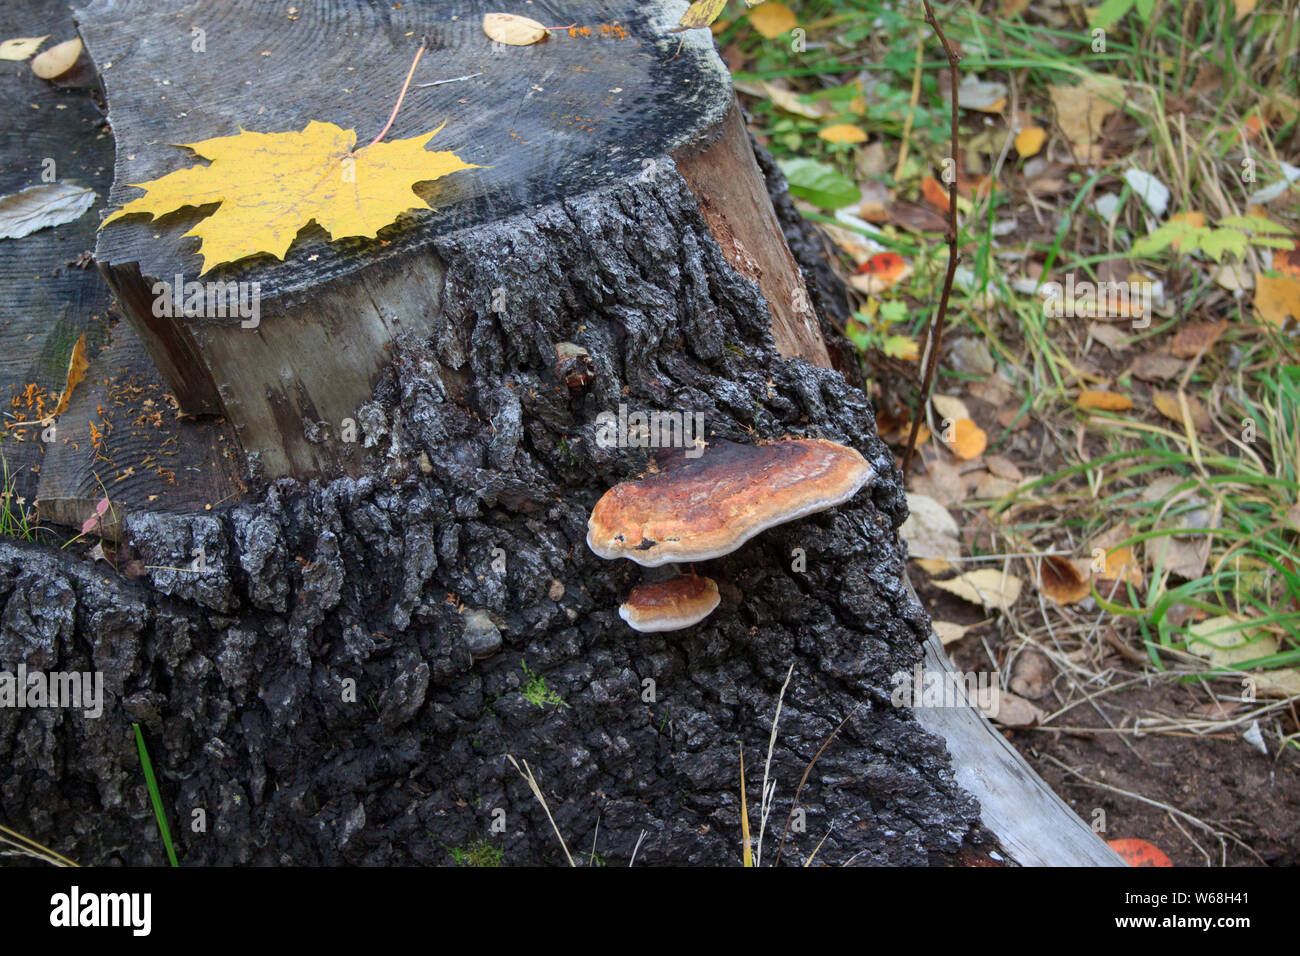 Two parasitic fungus are growing on a old stump. Yellow maple leaf. Seasons of the year. Live nature. Stock Photo